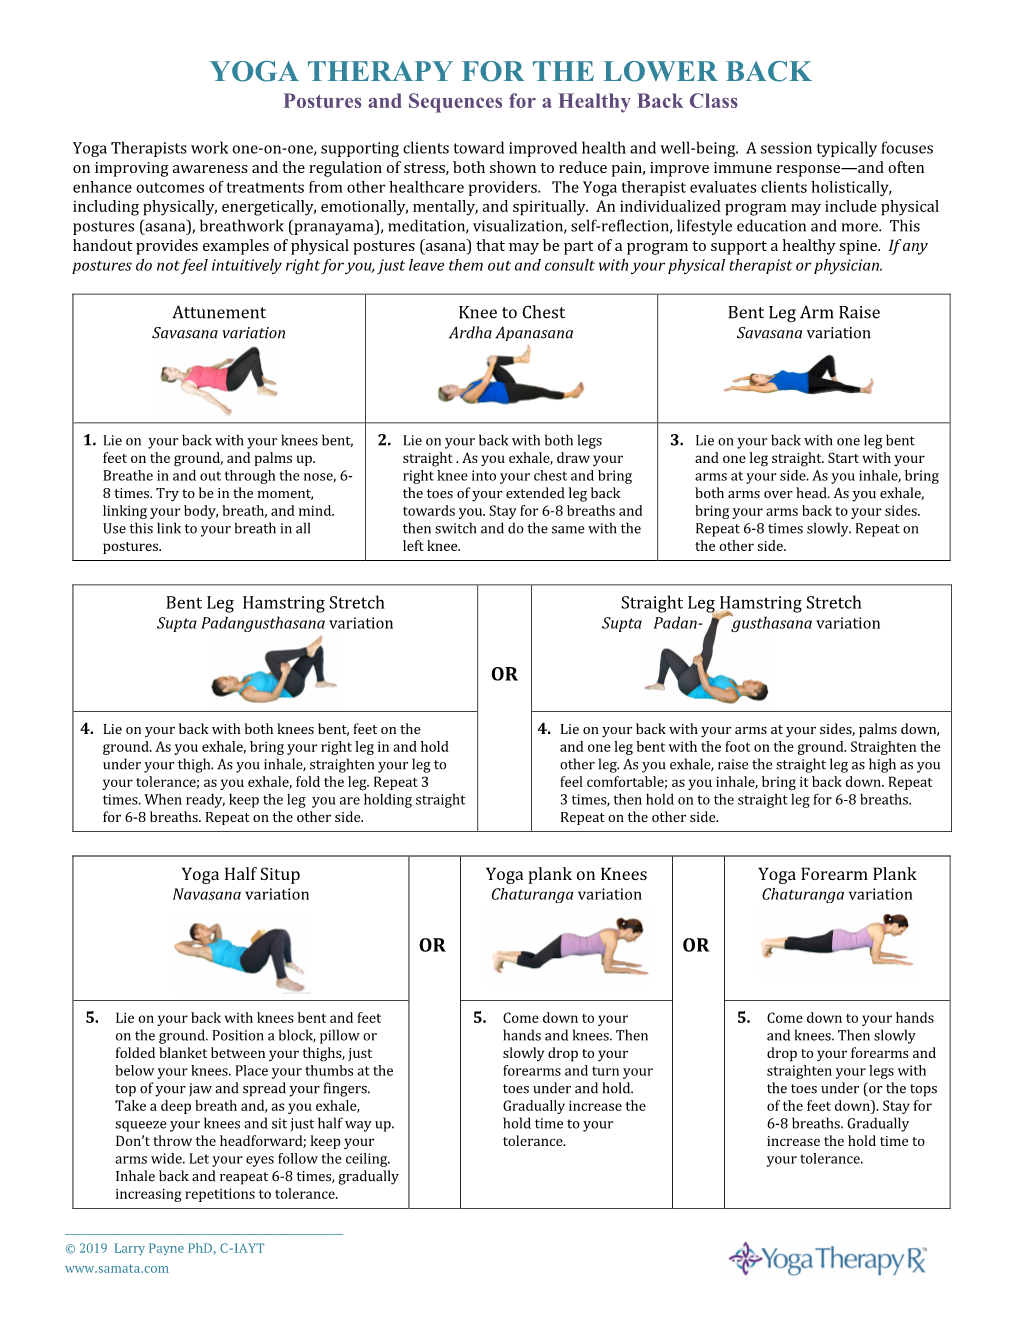 YOGA THERAPY for the LOWER BACK Postures and Sequences for a Healthy Back Class